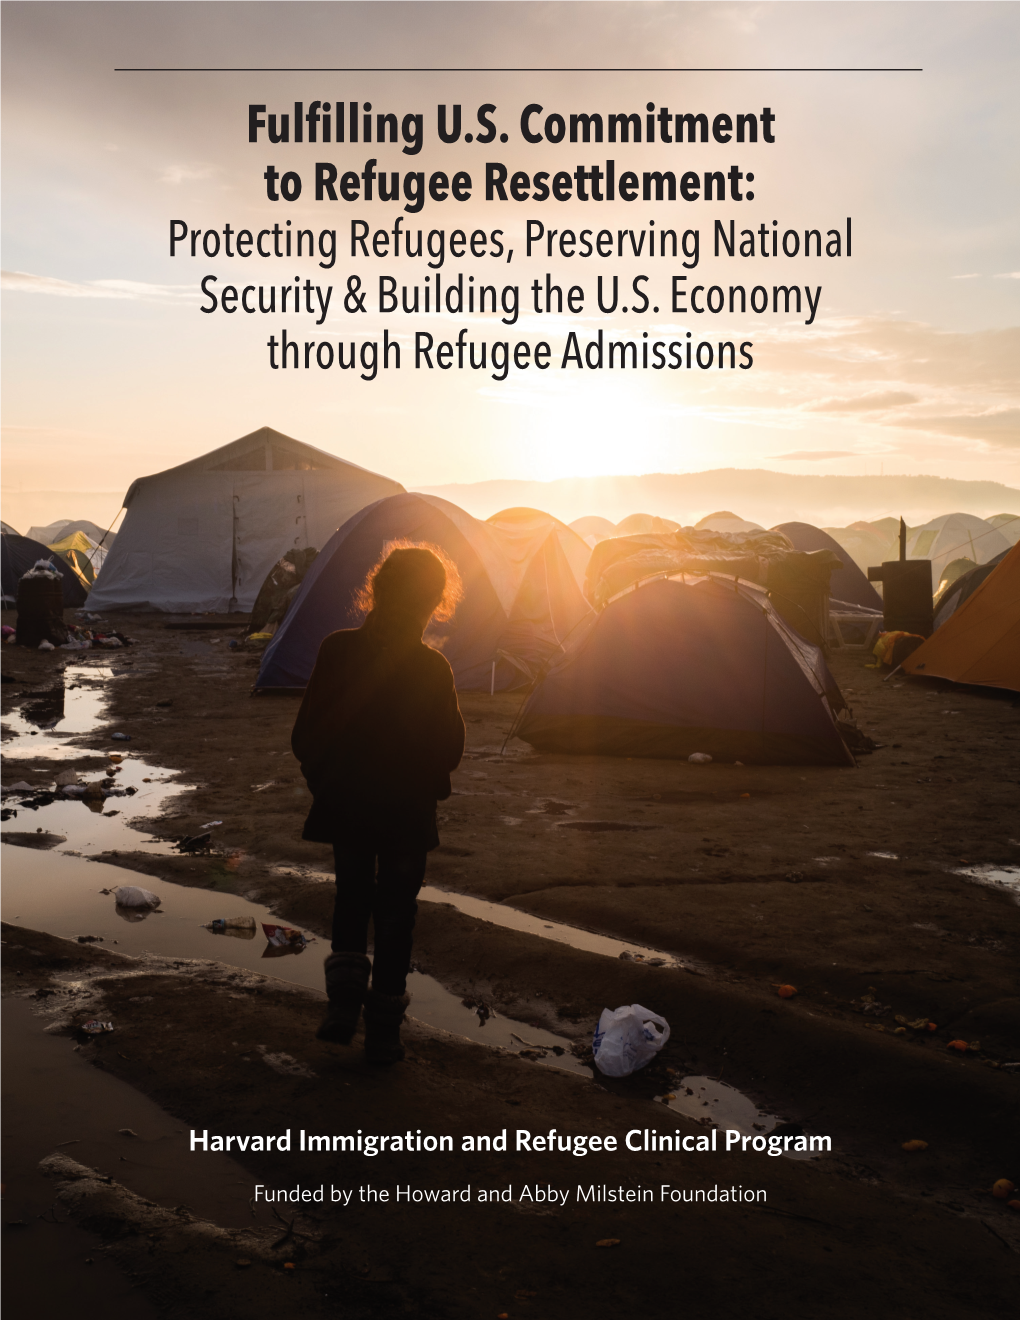 Fulfilling U.S. Commitment to Refugee Resettlement: Protecting Refugees, Preserving National Security & Building the U.S